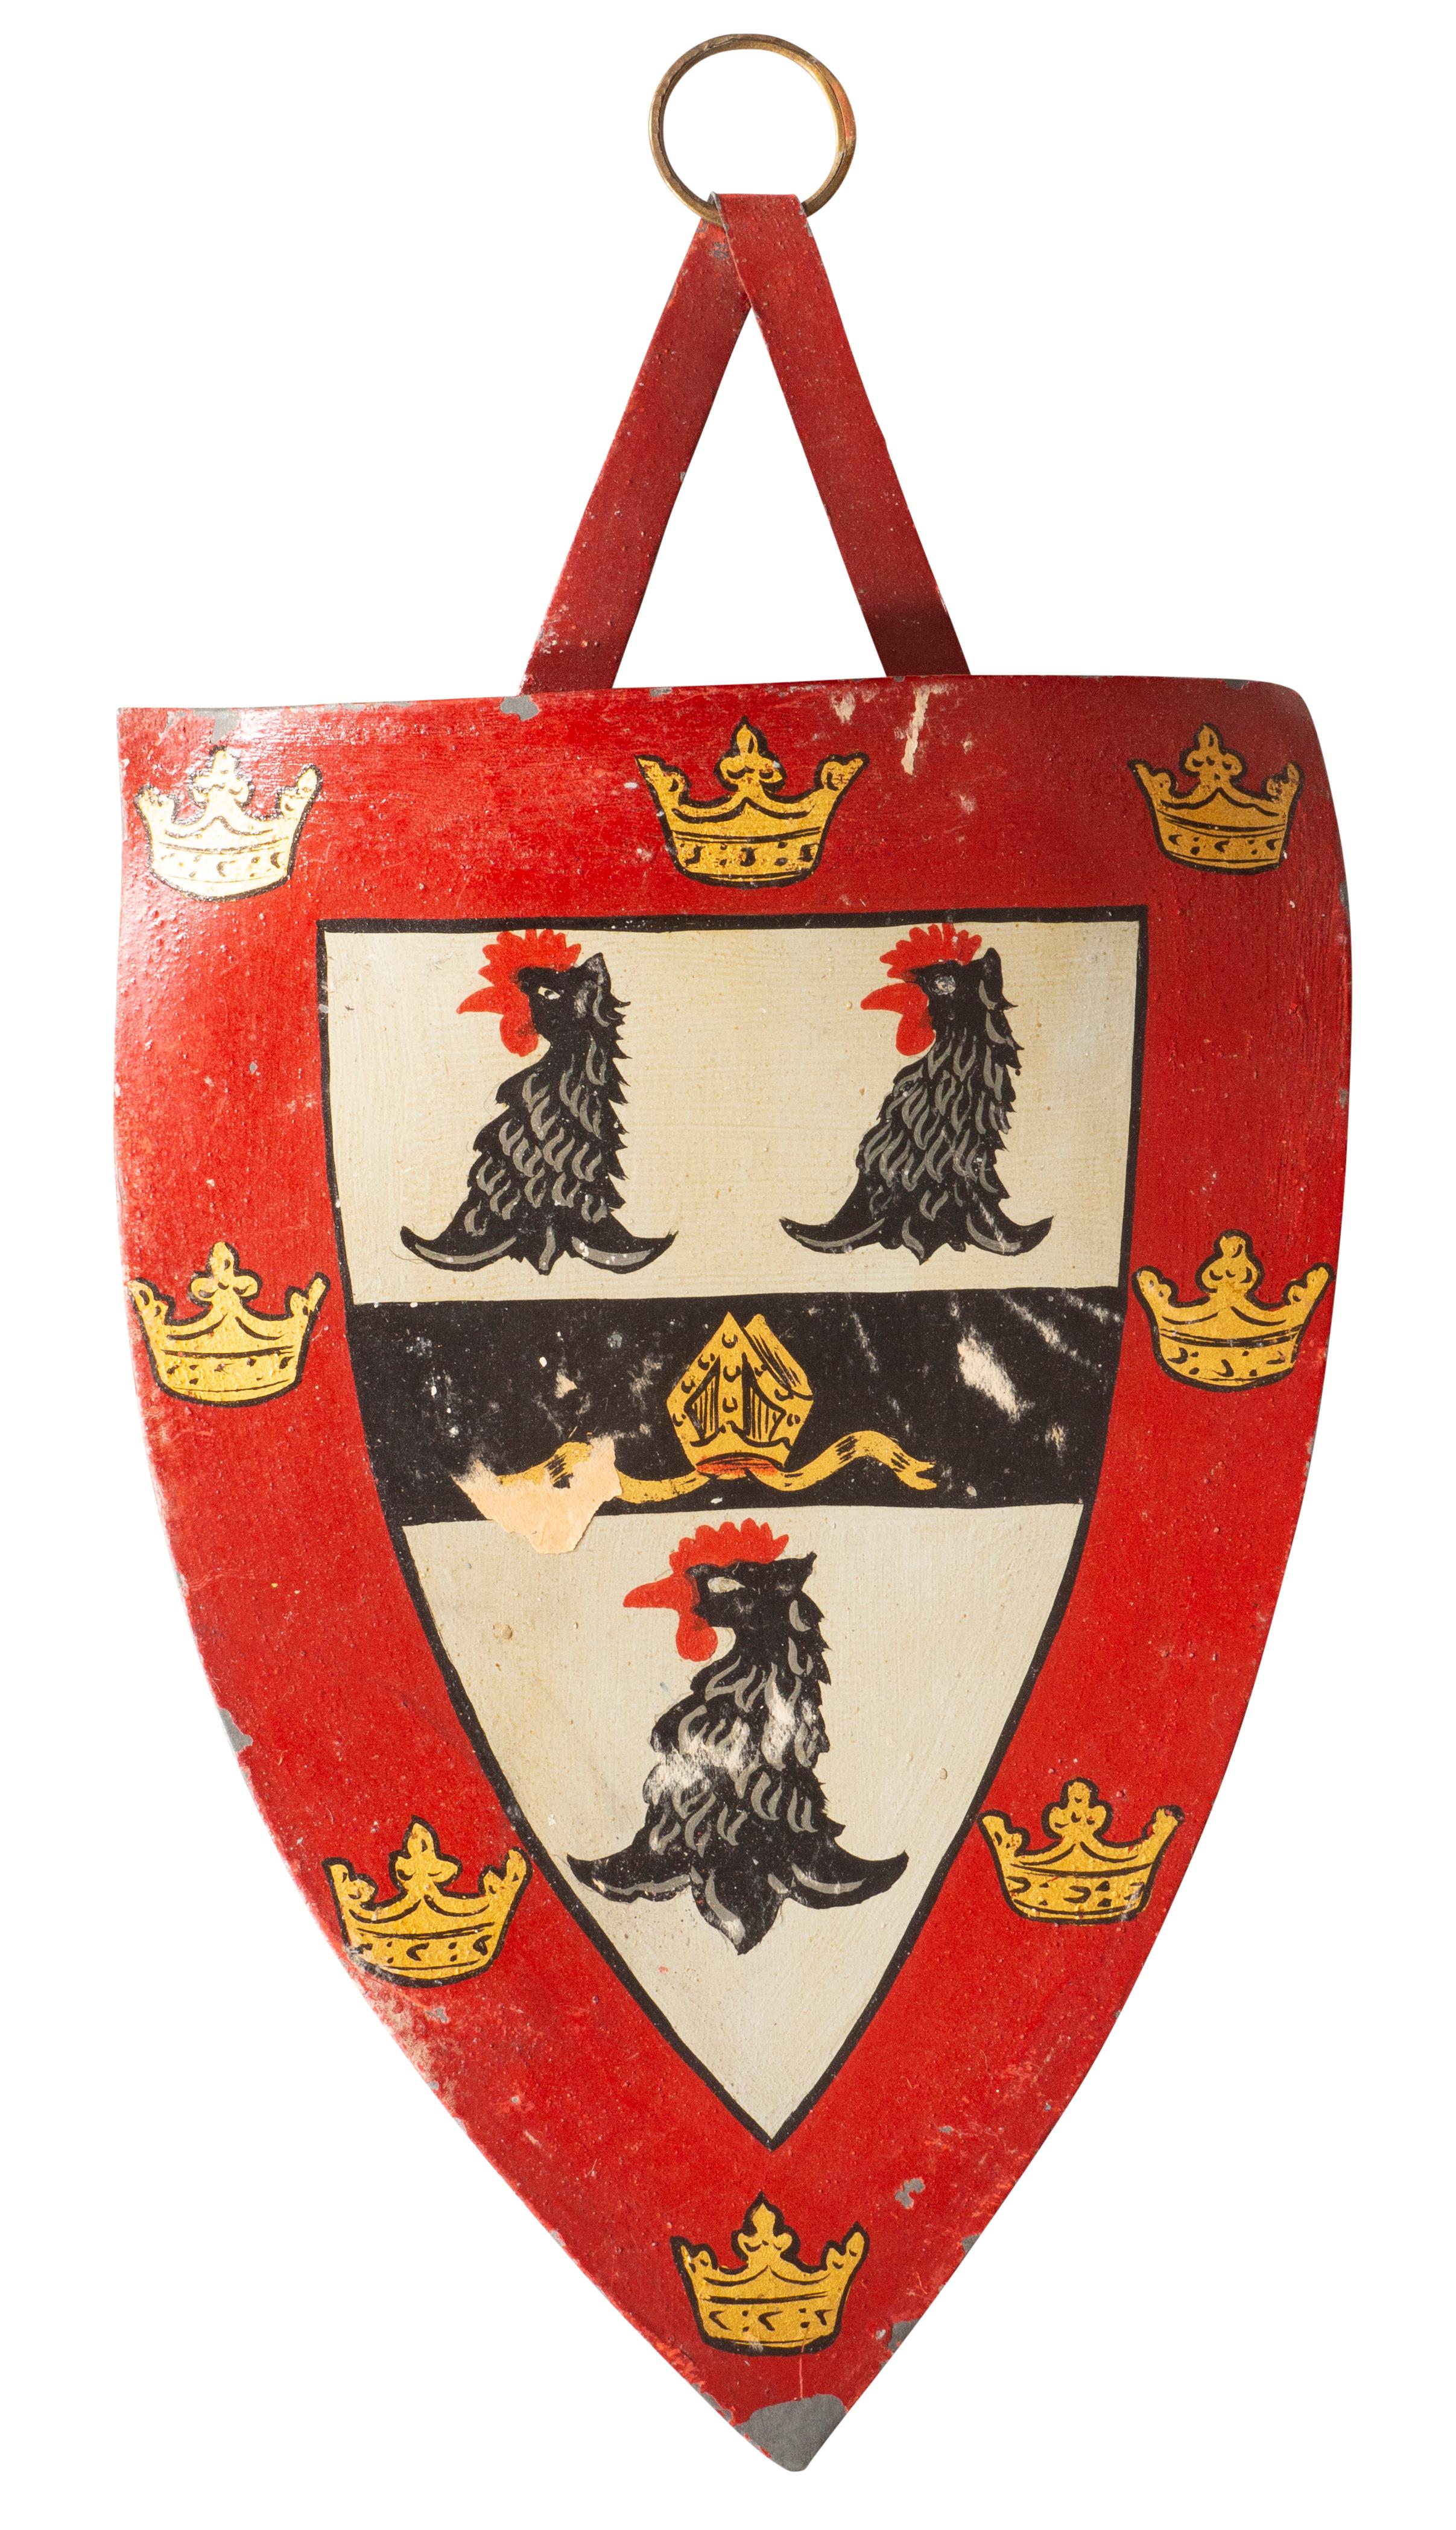 Shield shape each painted with a different college. Some identified on recerse.